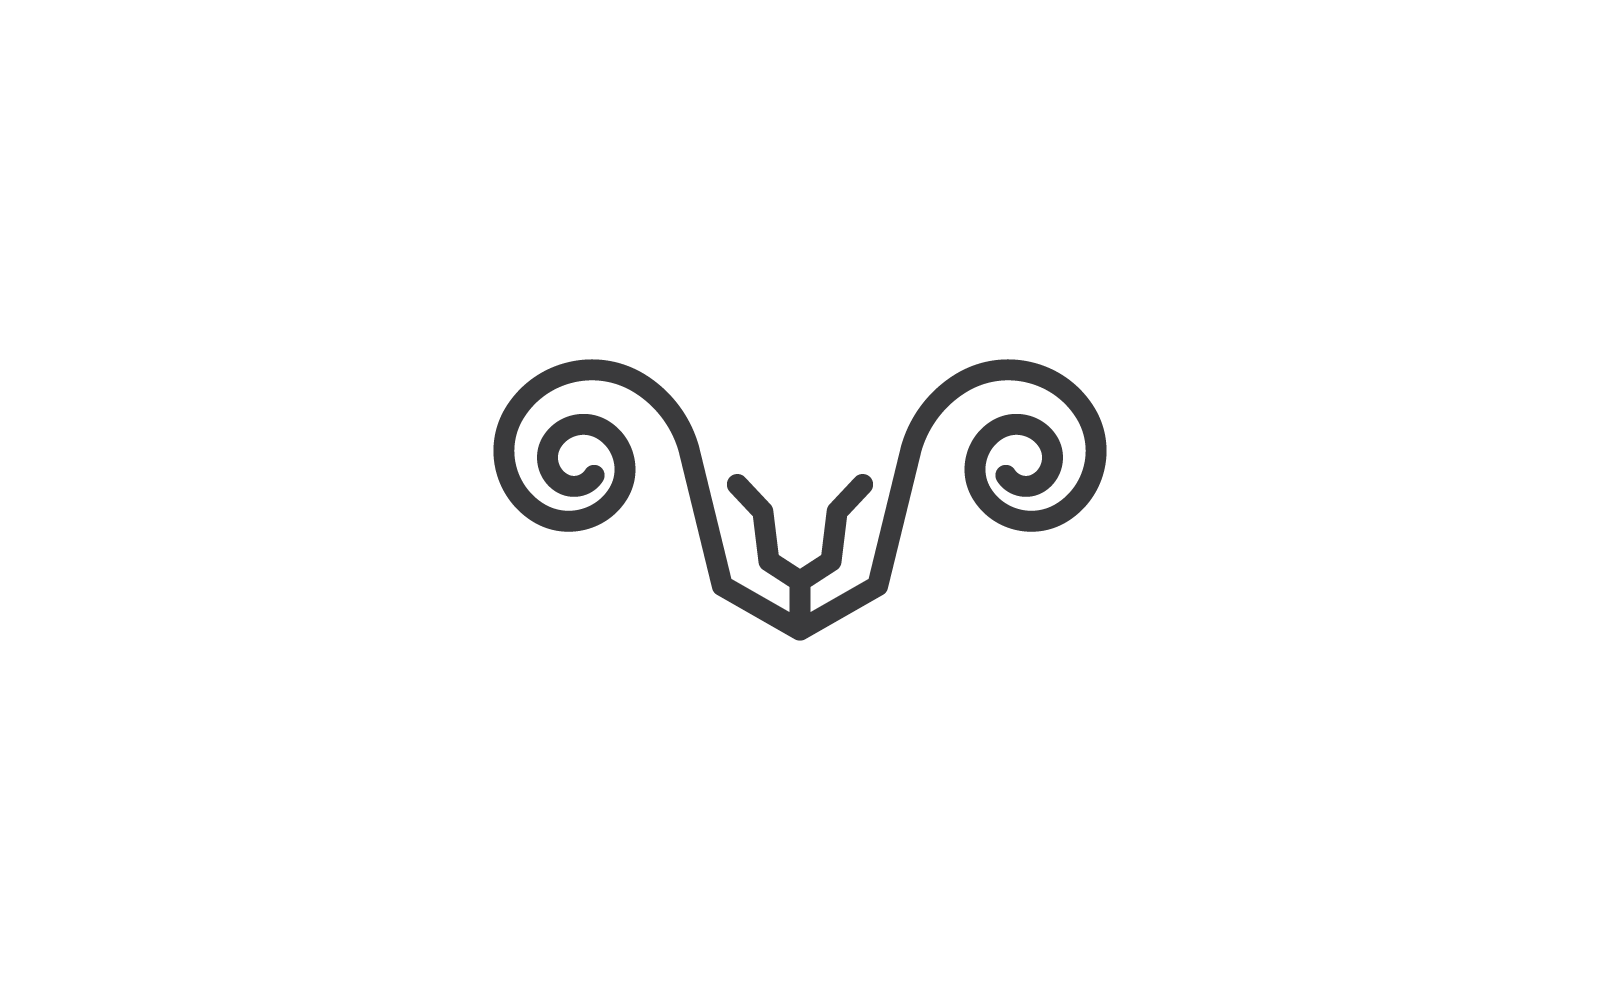 Goat and sheep illustration logo template vector